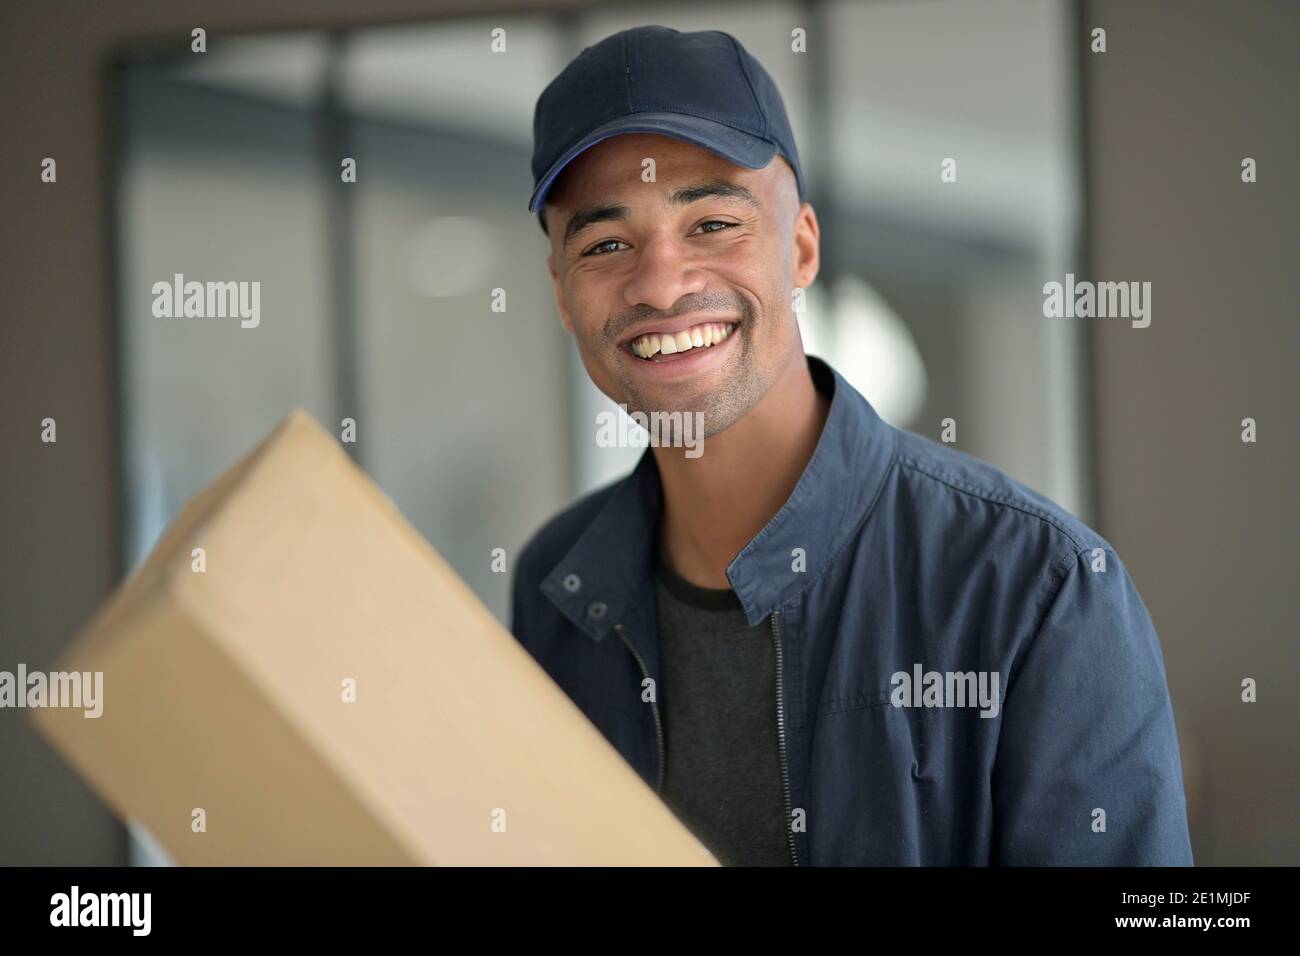 Portrait of afican-american delivery man holding craft box Stock Photo